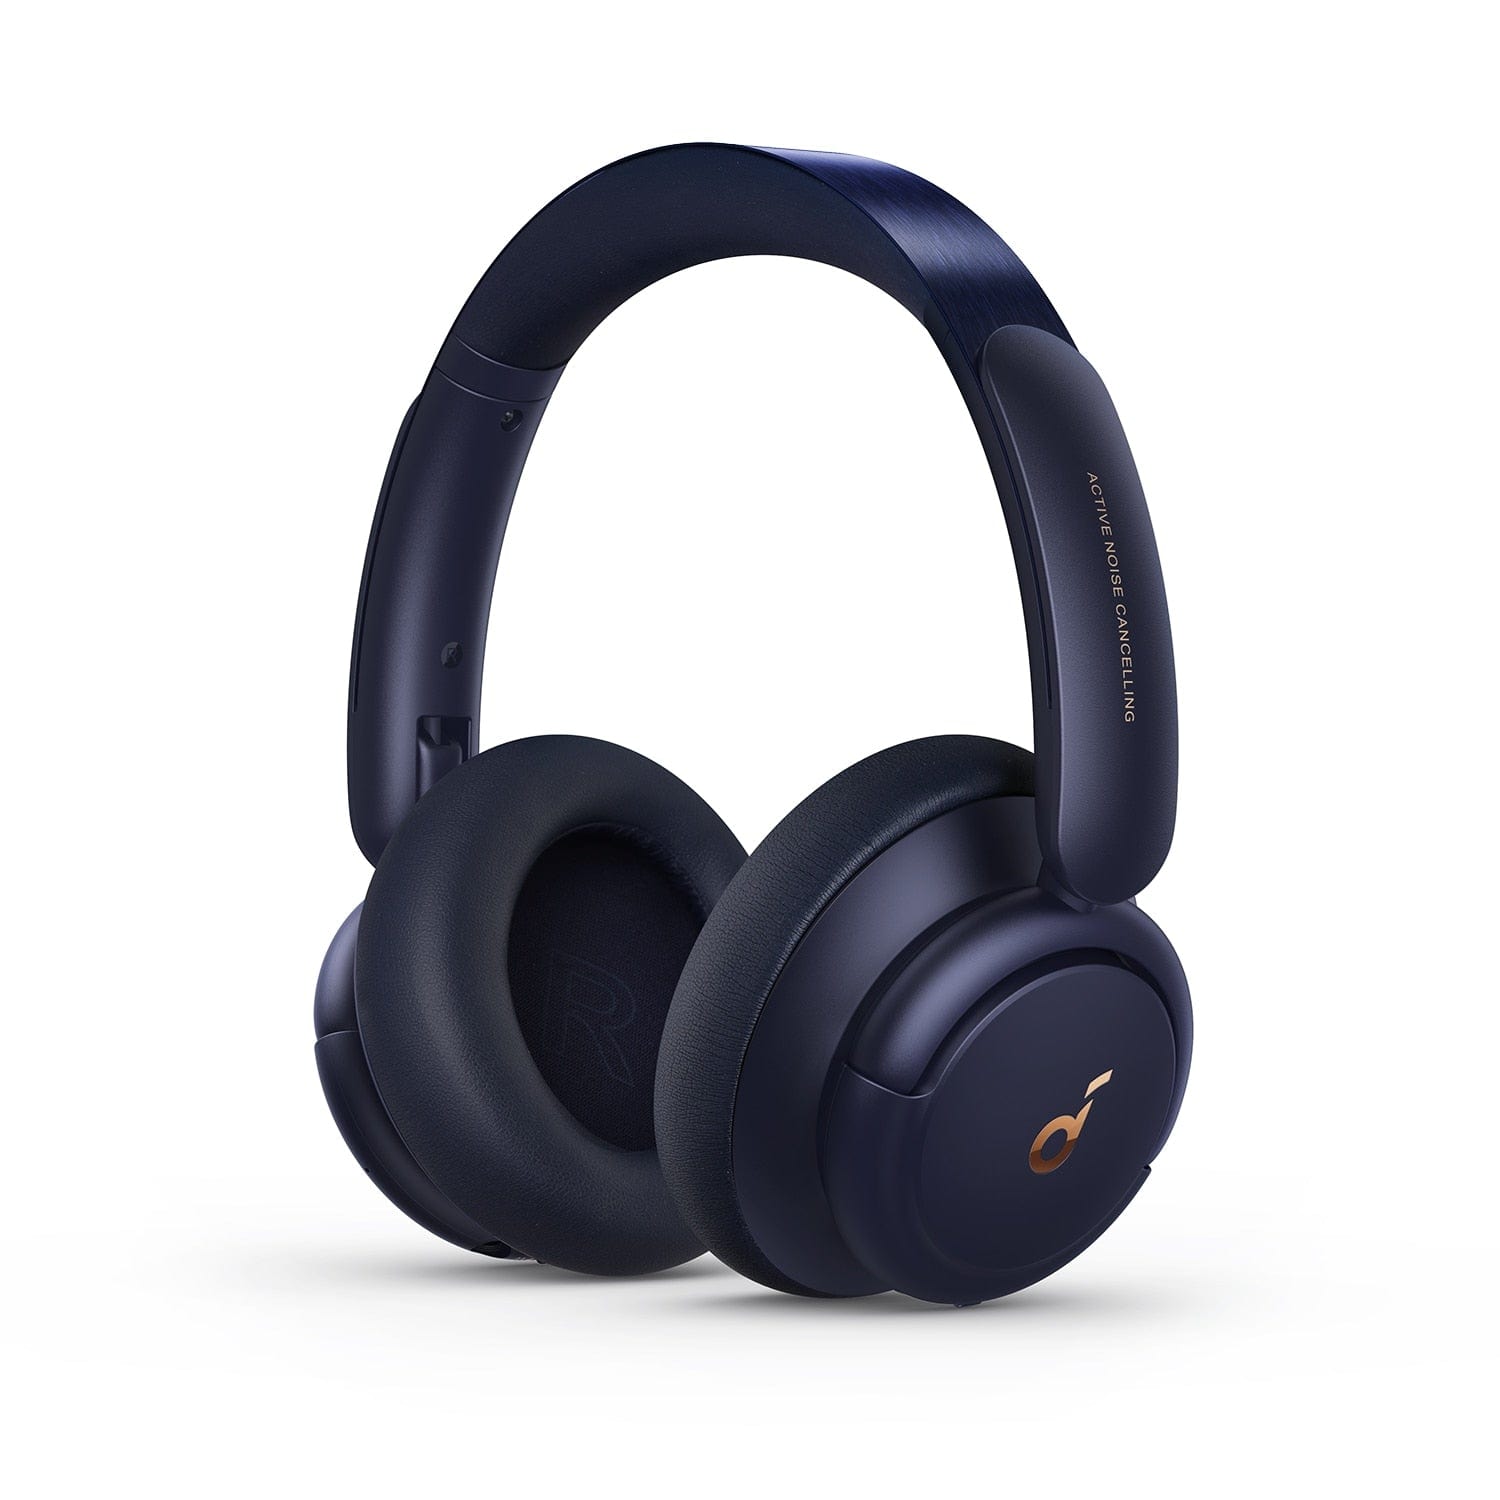 Soundcore Soundcore, Wireless Headphone, Version Life Q30, Supports Bluetooth 5.0, Playtime up to 40 Hours, Color Blue